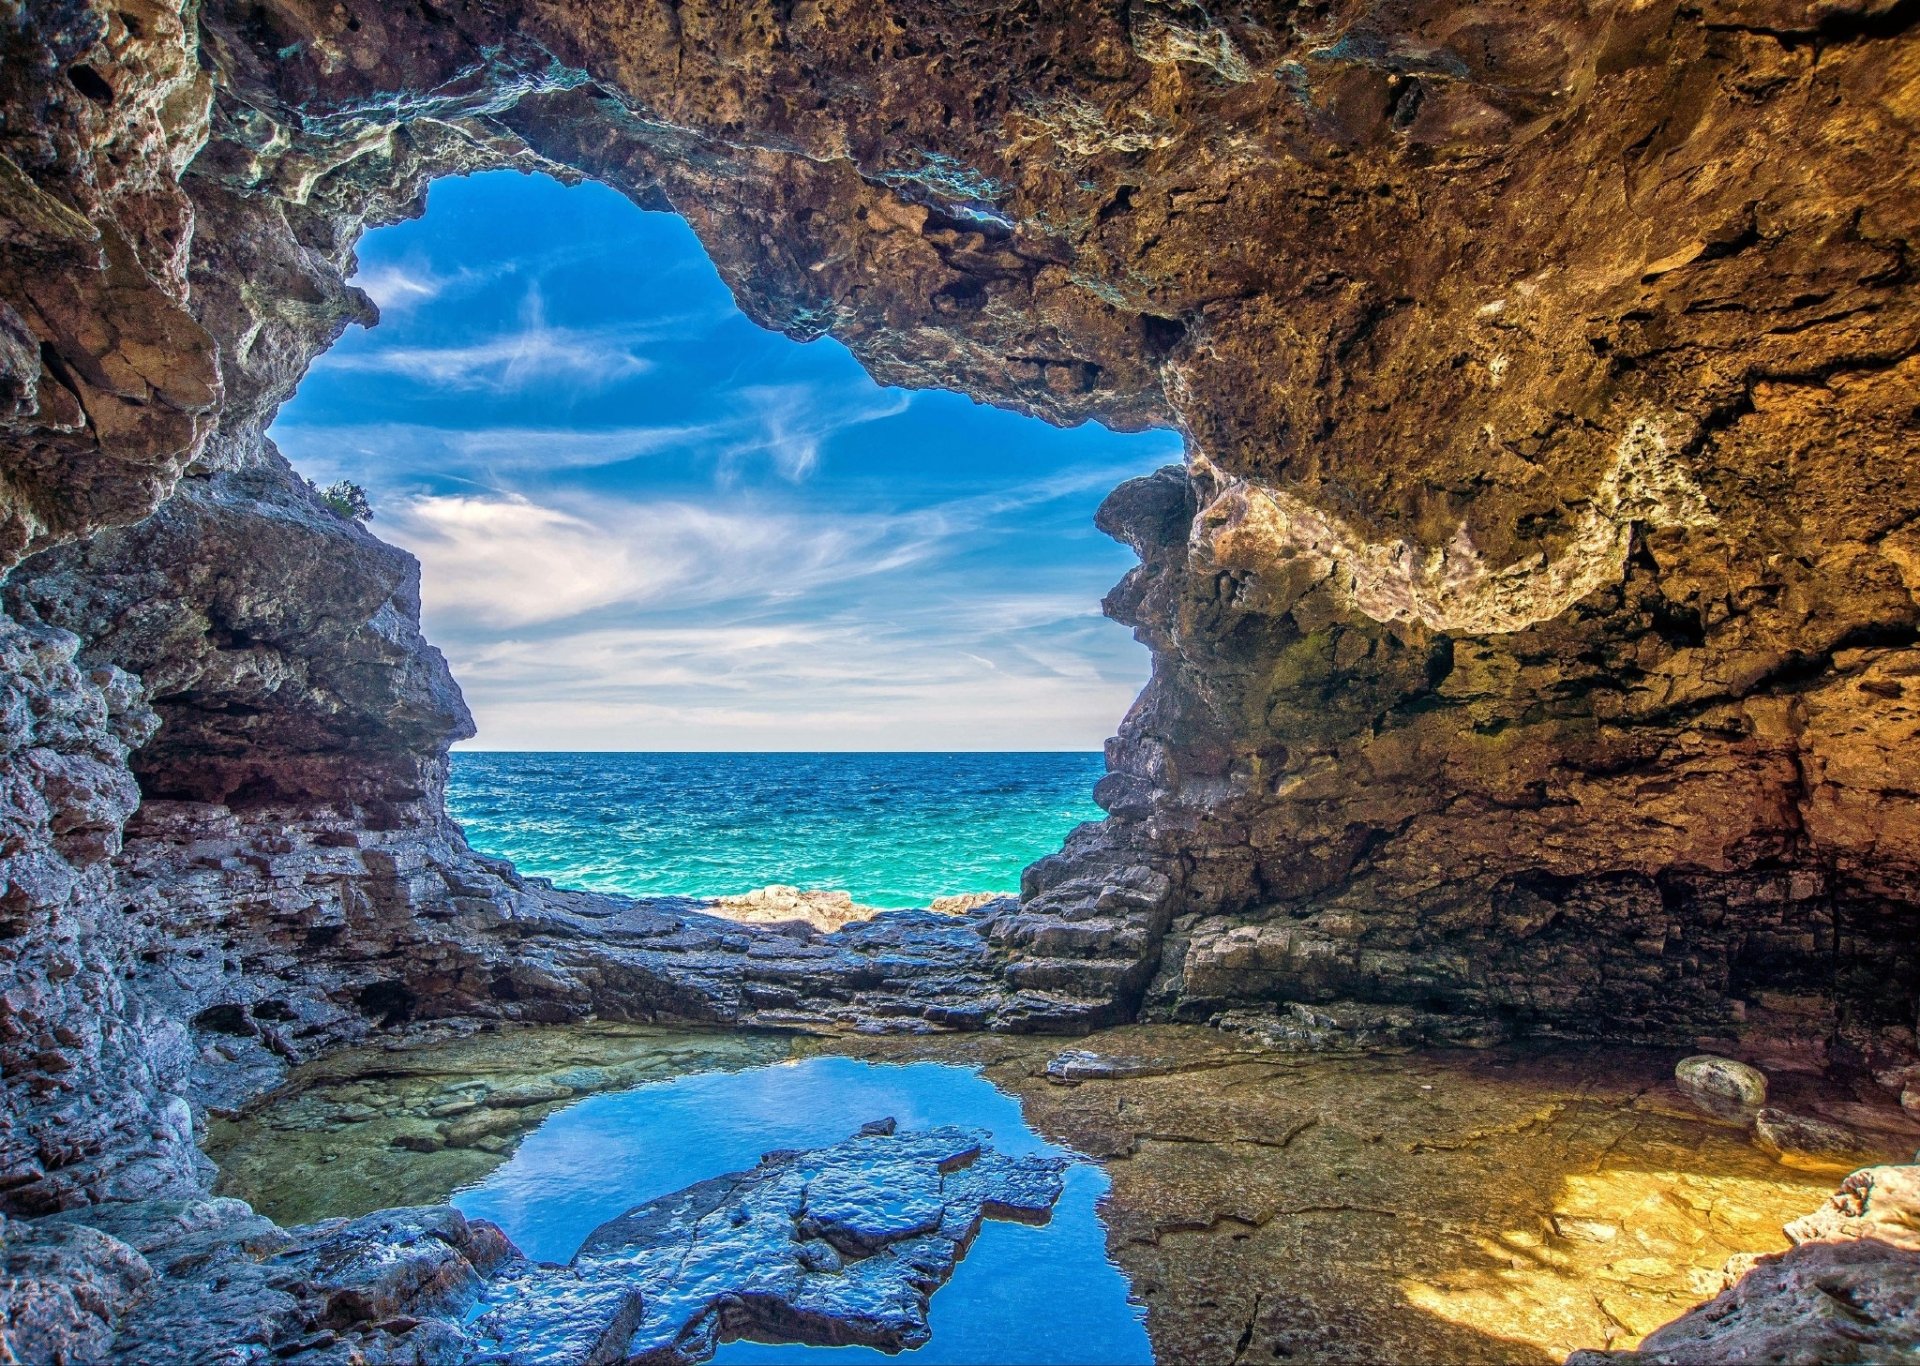 Ocean Cave Hd Wallpaper Background Image 2048x1457 Id745860